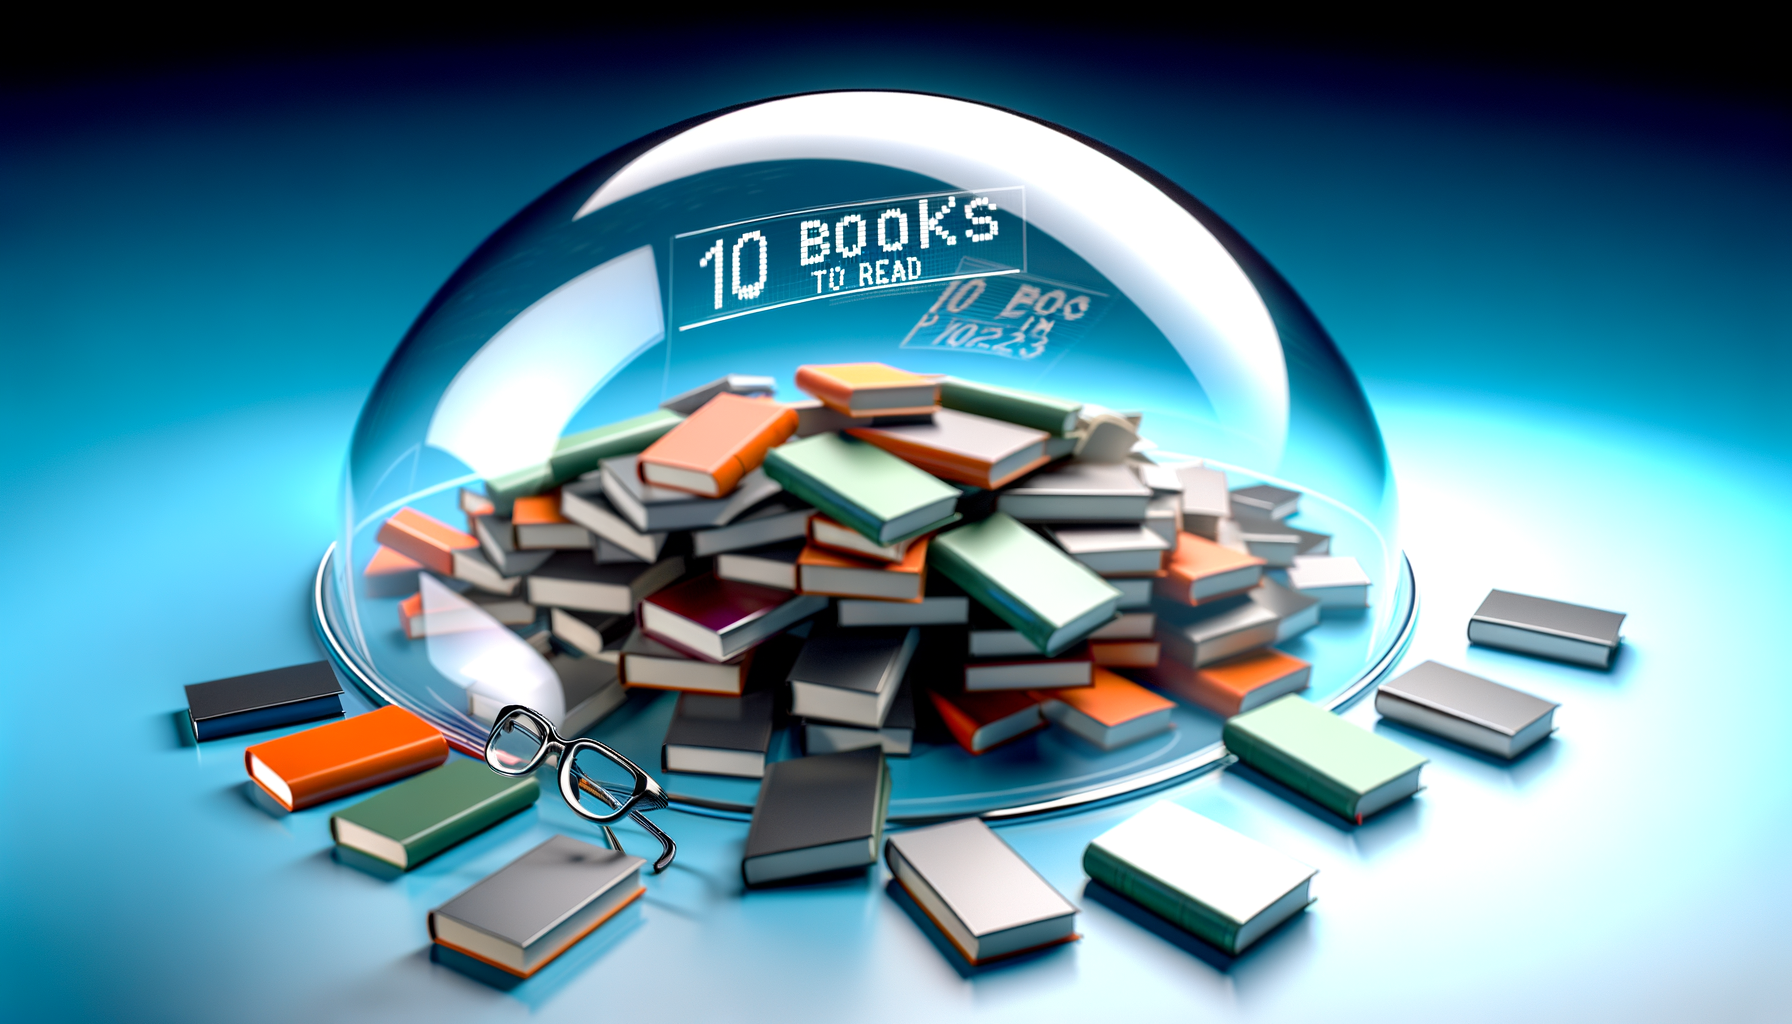 10 Books to Read in 2023